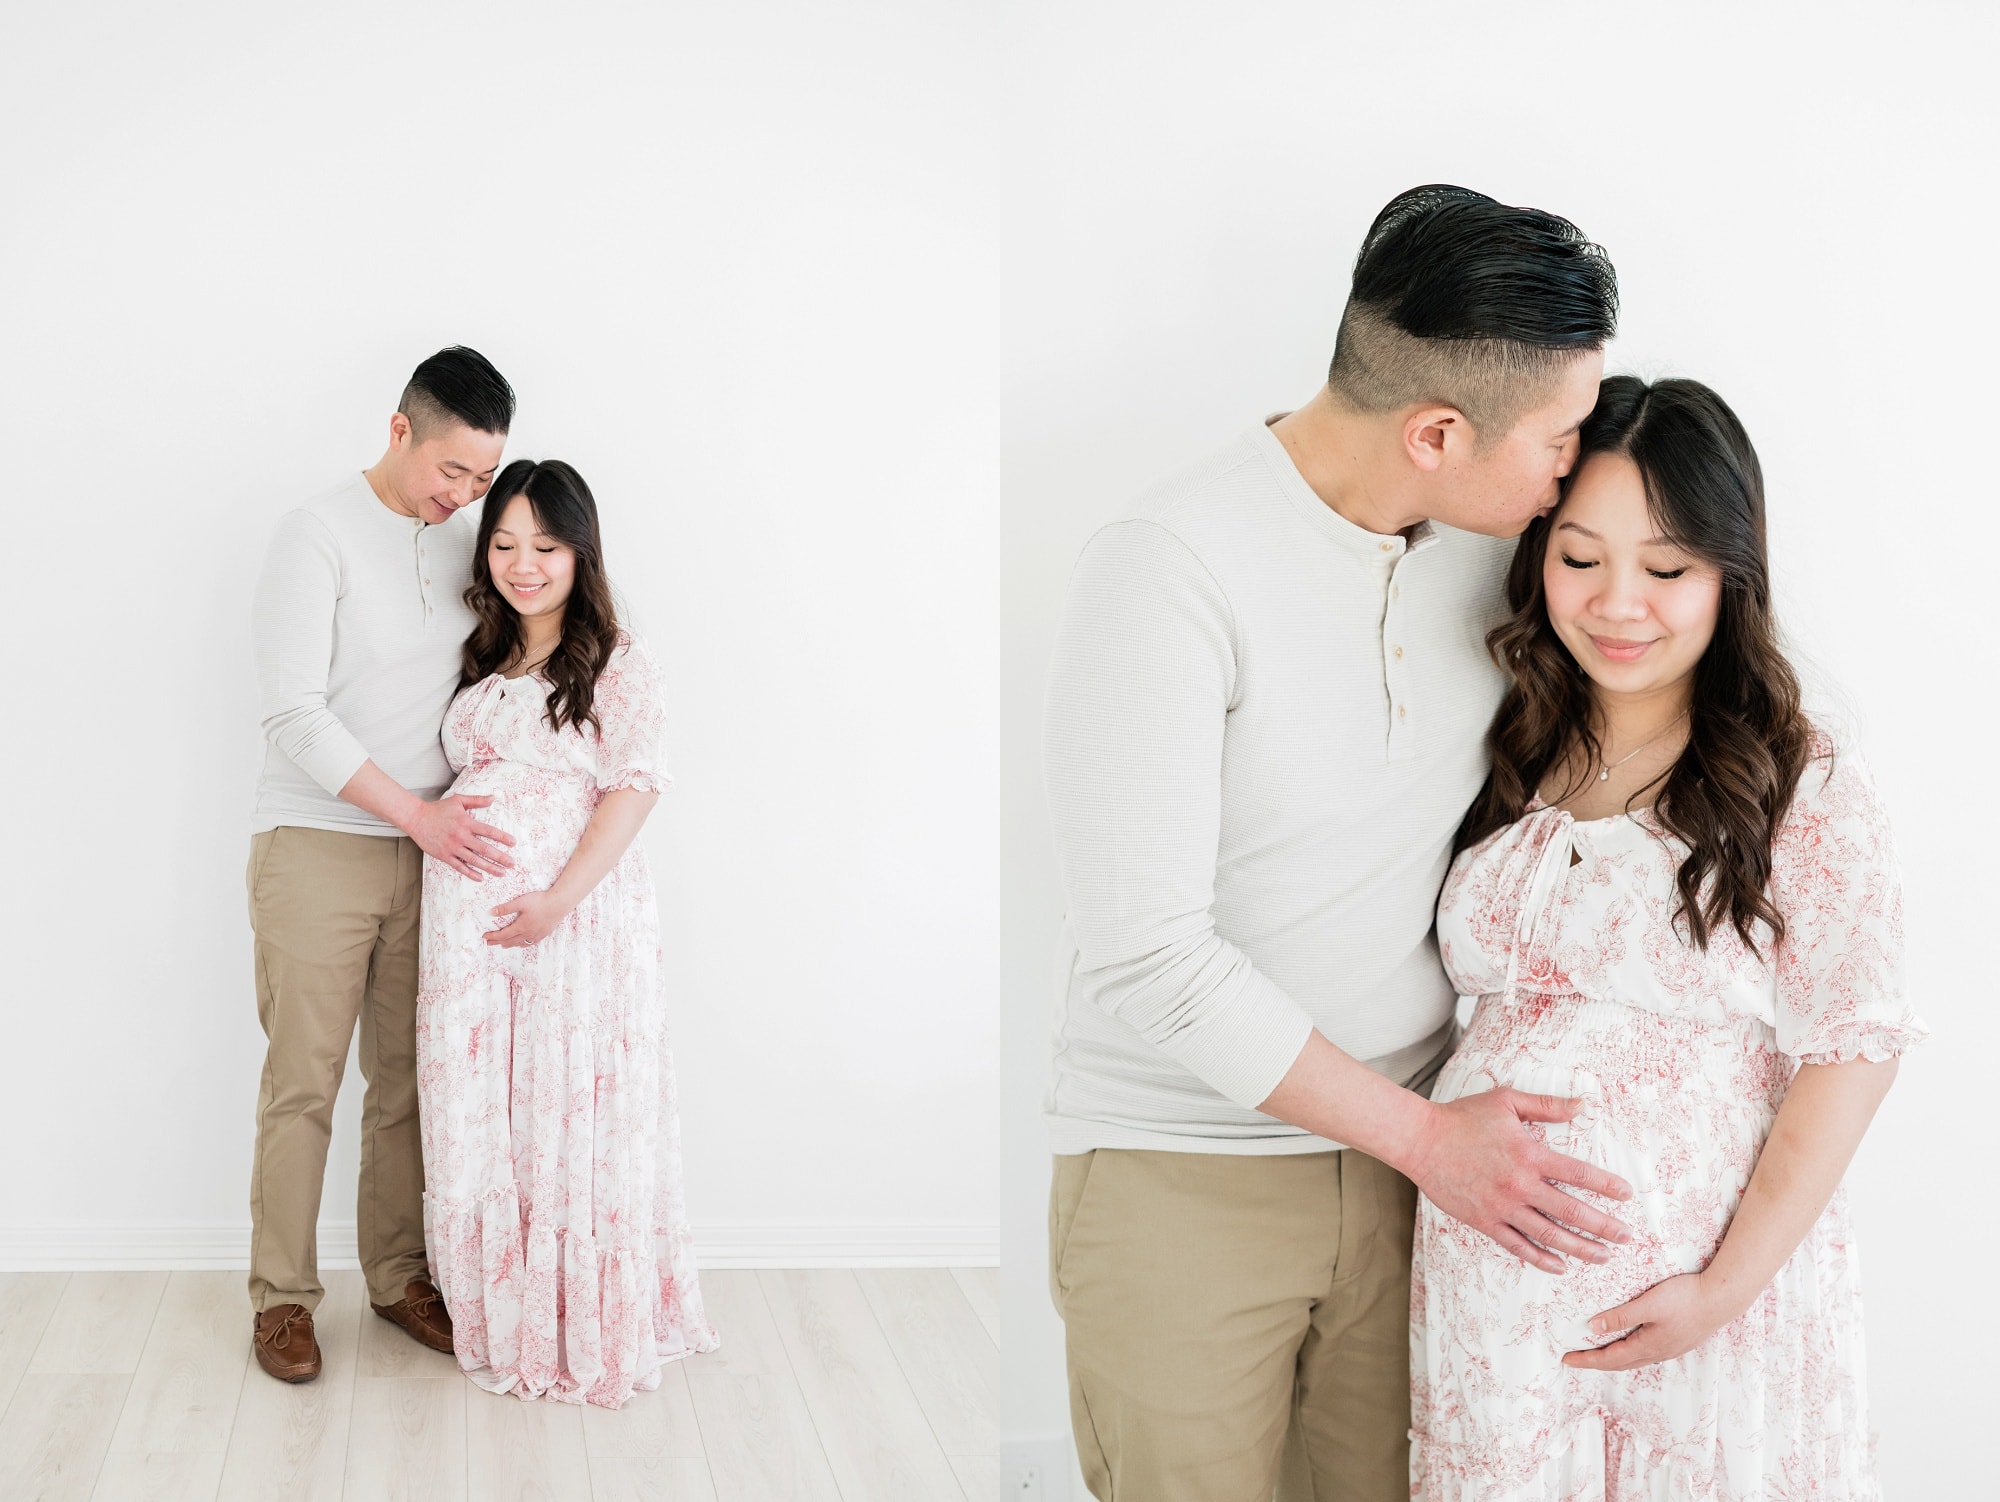 Studio maternity session of a couple